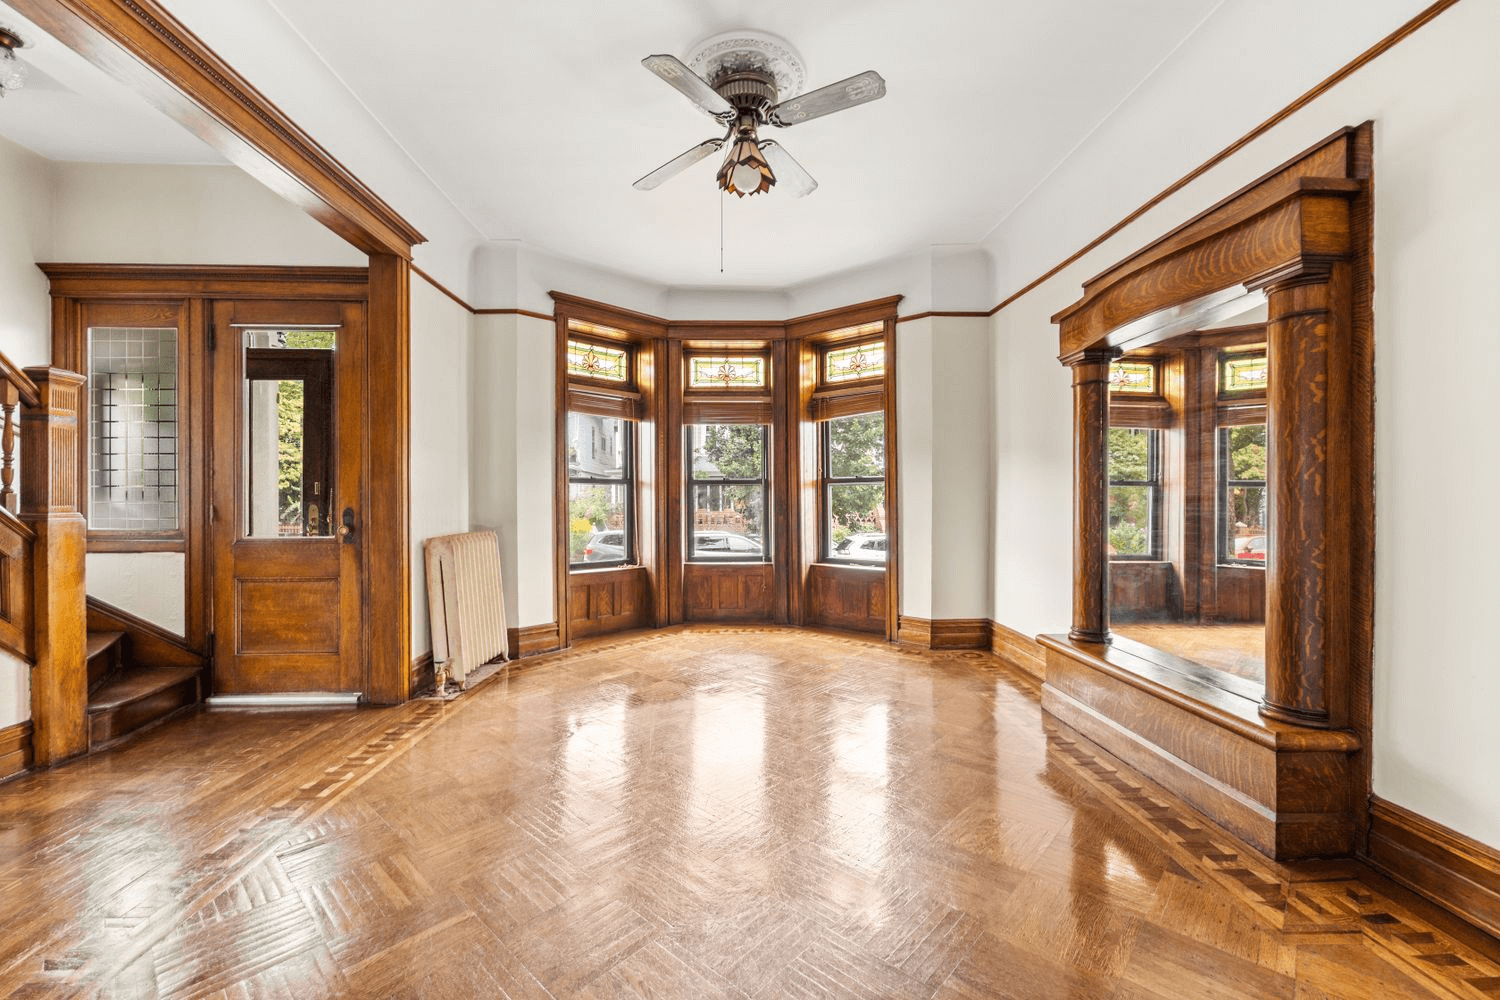 kensington parlor with pier mirror and wood floors and trim